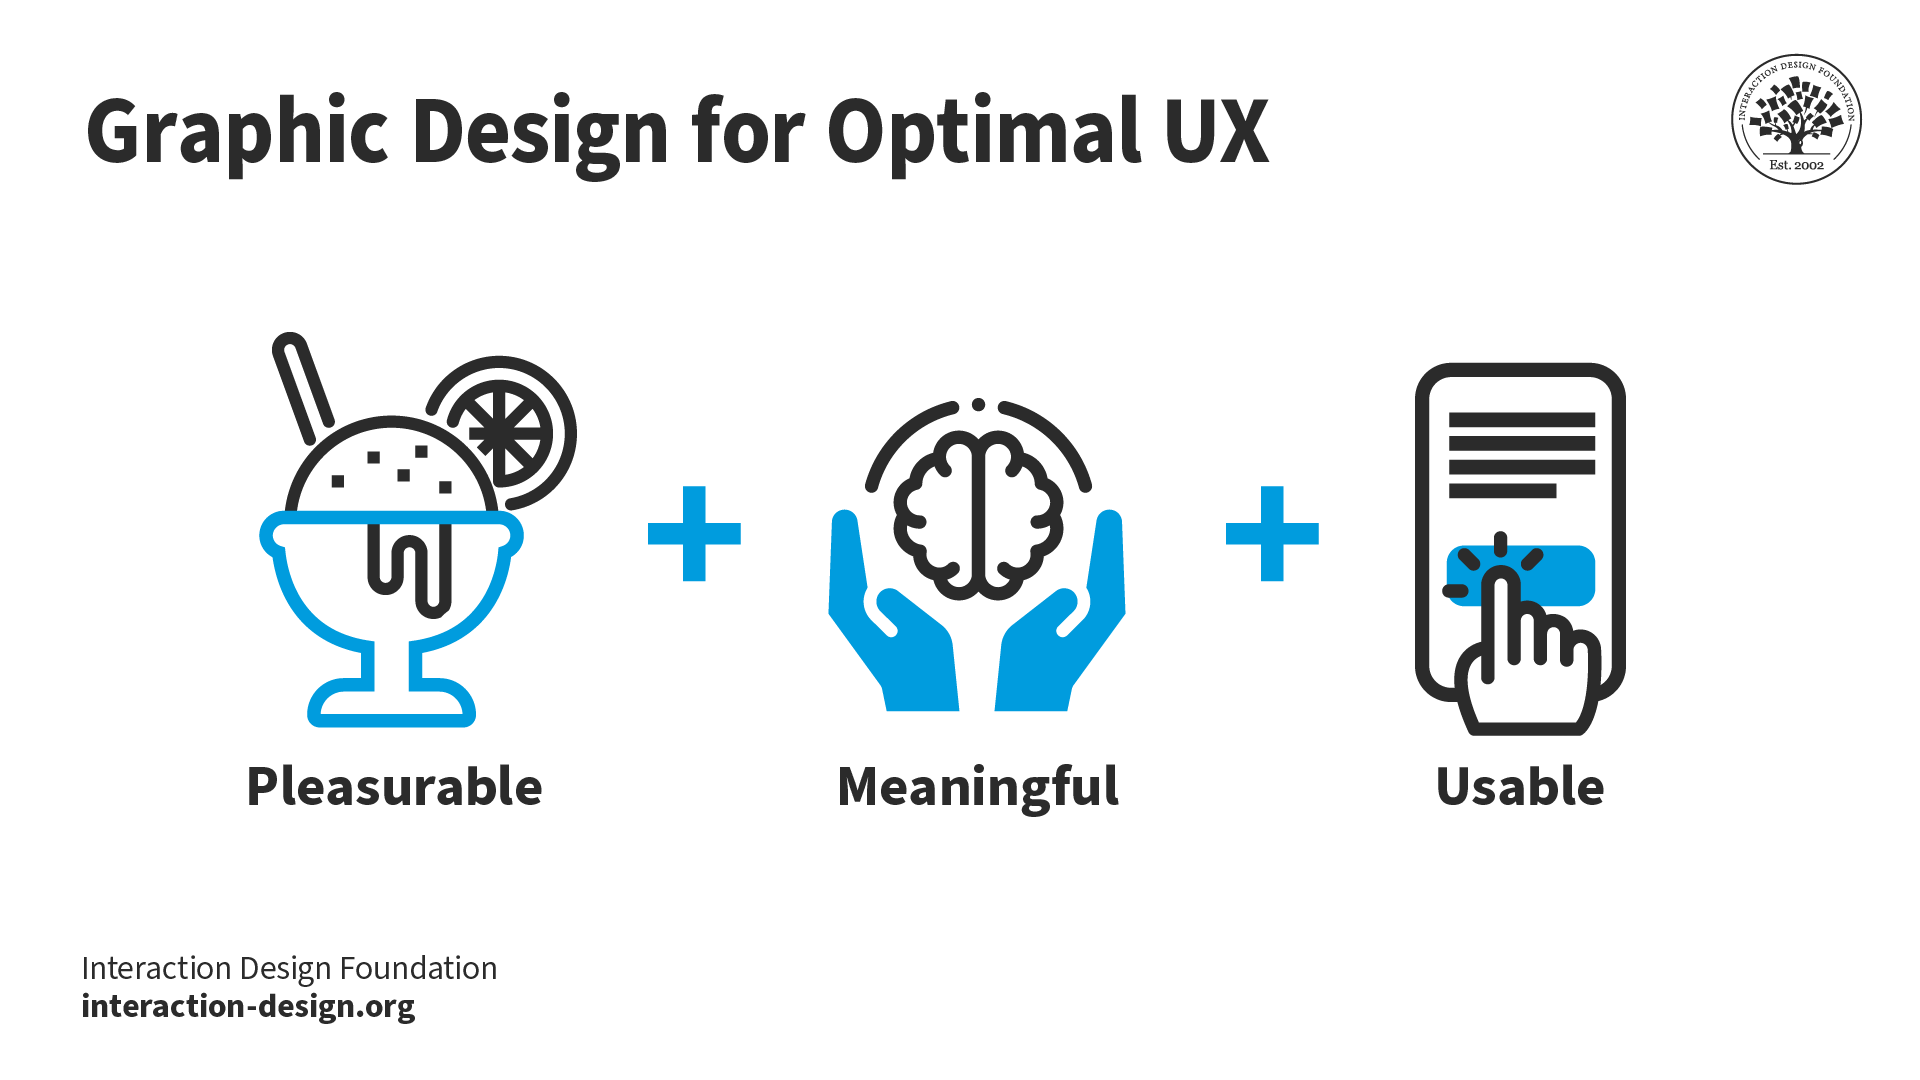 Graphic Design for Optimal UX